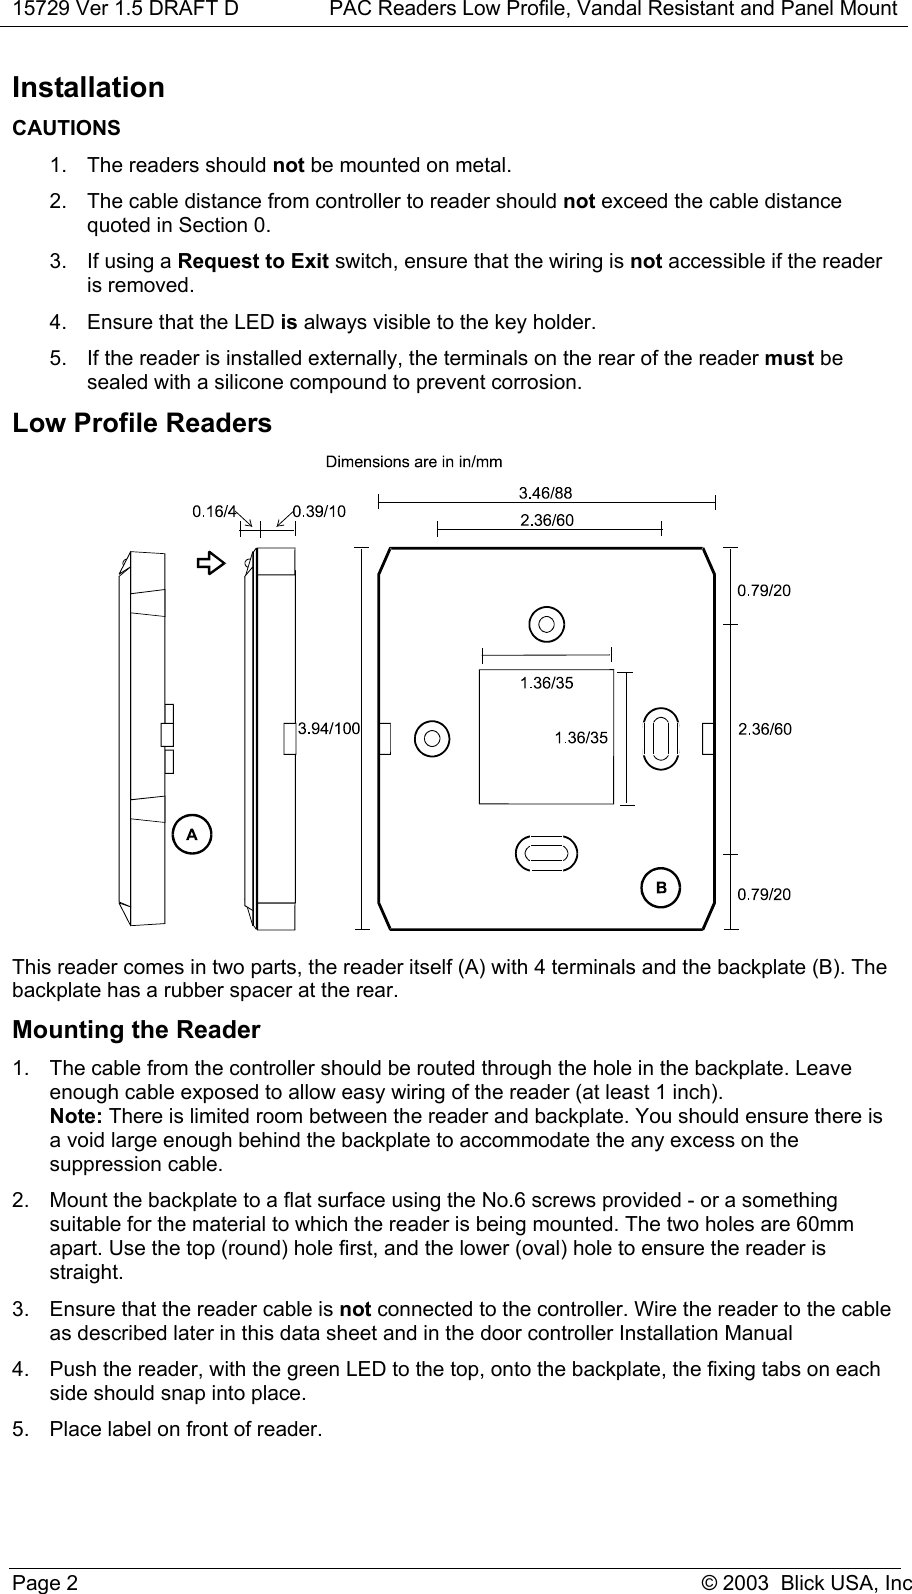 15729 Ver 1.5 DRAFT D PAC Readers Low Profile, Vandal Resistant and Panel MountPage 2 © 2003  Blick USA, IncInstallationCAUTIONS1.  The readers should not be mounted on metal.2.  The cable distance from controller to reader should not exceed the cable distancequoted in Section 0.3.  If using a Request to Exit switch, ensure that the wiring is not accessible if the readeris removed.4.  Ensure that the LED is always visible to the key holder.5.  If the reader is installed externally, the terminals on the rear of the reader must besealed with a silicone compound to prevent corrosion.Low Profile ReadersThis reader comes in two parts, the reader itself (A) with 4 terminals and the backplate (B). Thebackplate has a rubber spacer at the rear.Mounting the Reader1.  The cable from the controller should be routed through the hole in the backplate. Leaveenough cable exposed to allow easy wiring of the reader (at least 1 inch).Note: There is limited room between the reader and backplate. You should ensure there isa void large enough behind the backplate to accommodate the any excess on thesuppression cable.2.  Mount the backplate to a flat surface using the No.6 screws provided - or a somethingsuitable for the material to which the reader is being mounted. The two holes are 60mmapart. Use the top (round) hole first, and the lower (oval) hole to ensure the reader isstraight.3.  Ensure that the reader cable is not connected to the controller. Wire the reader to the cableas described later in this data sheet and in the door controller Installation Manual4.  Push the reader, with the green LED to the top, onto the backplate, the fixing tabs on eachside should snap into place.5.  Place label on front of reader.